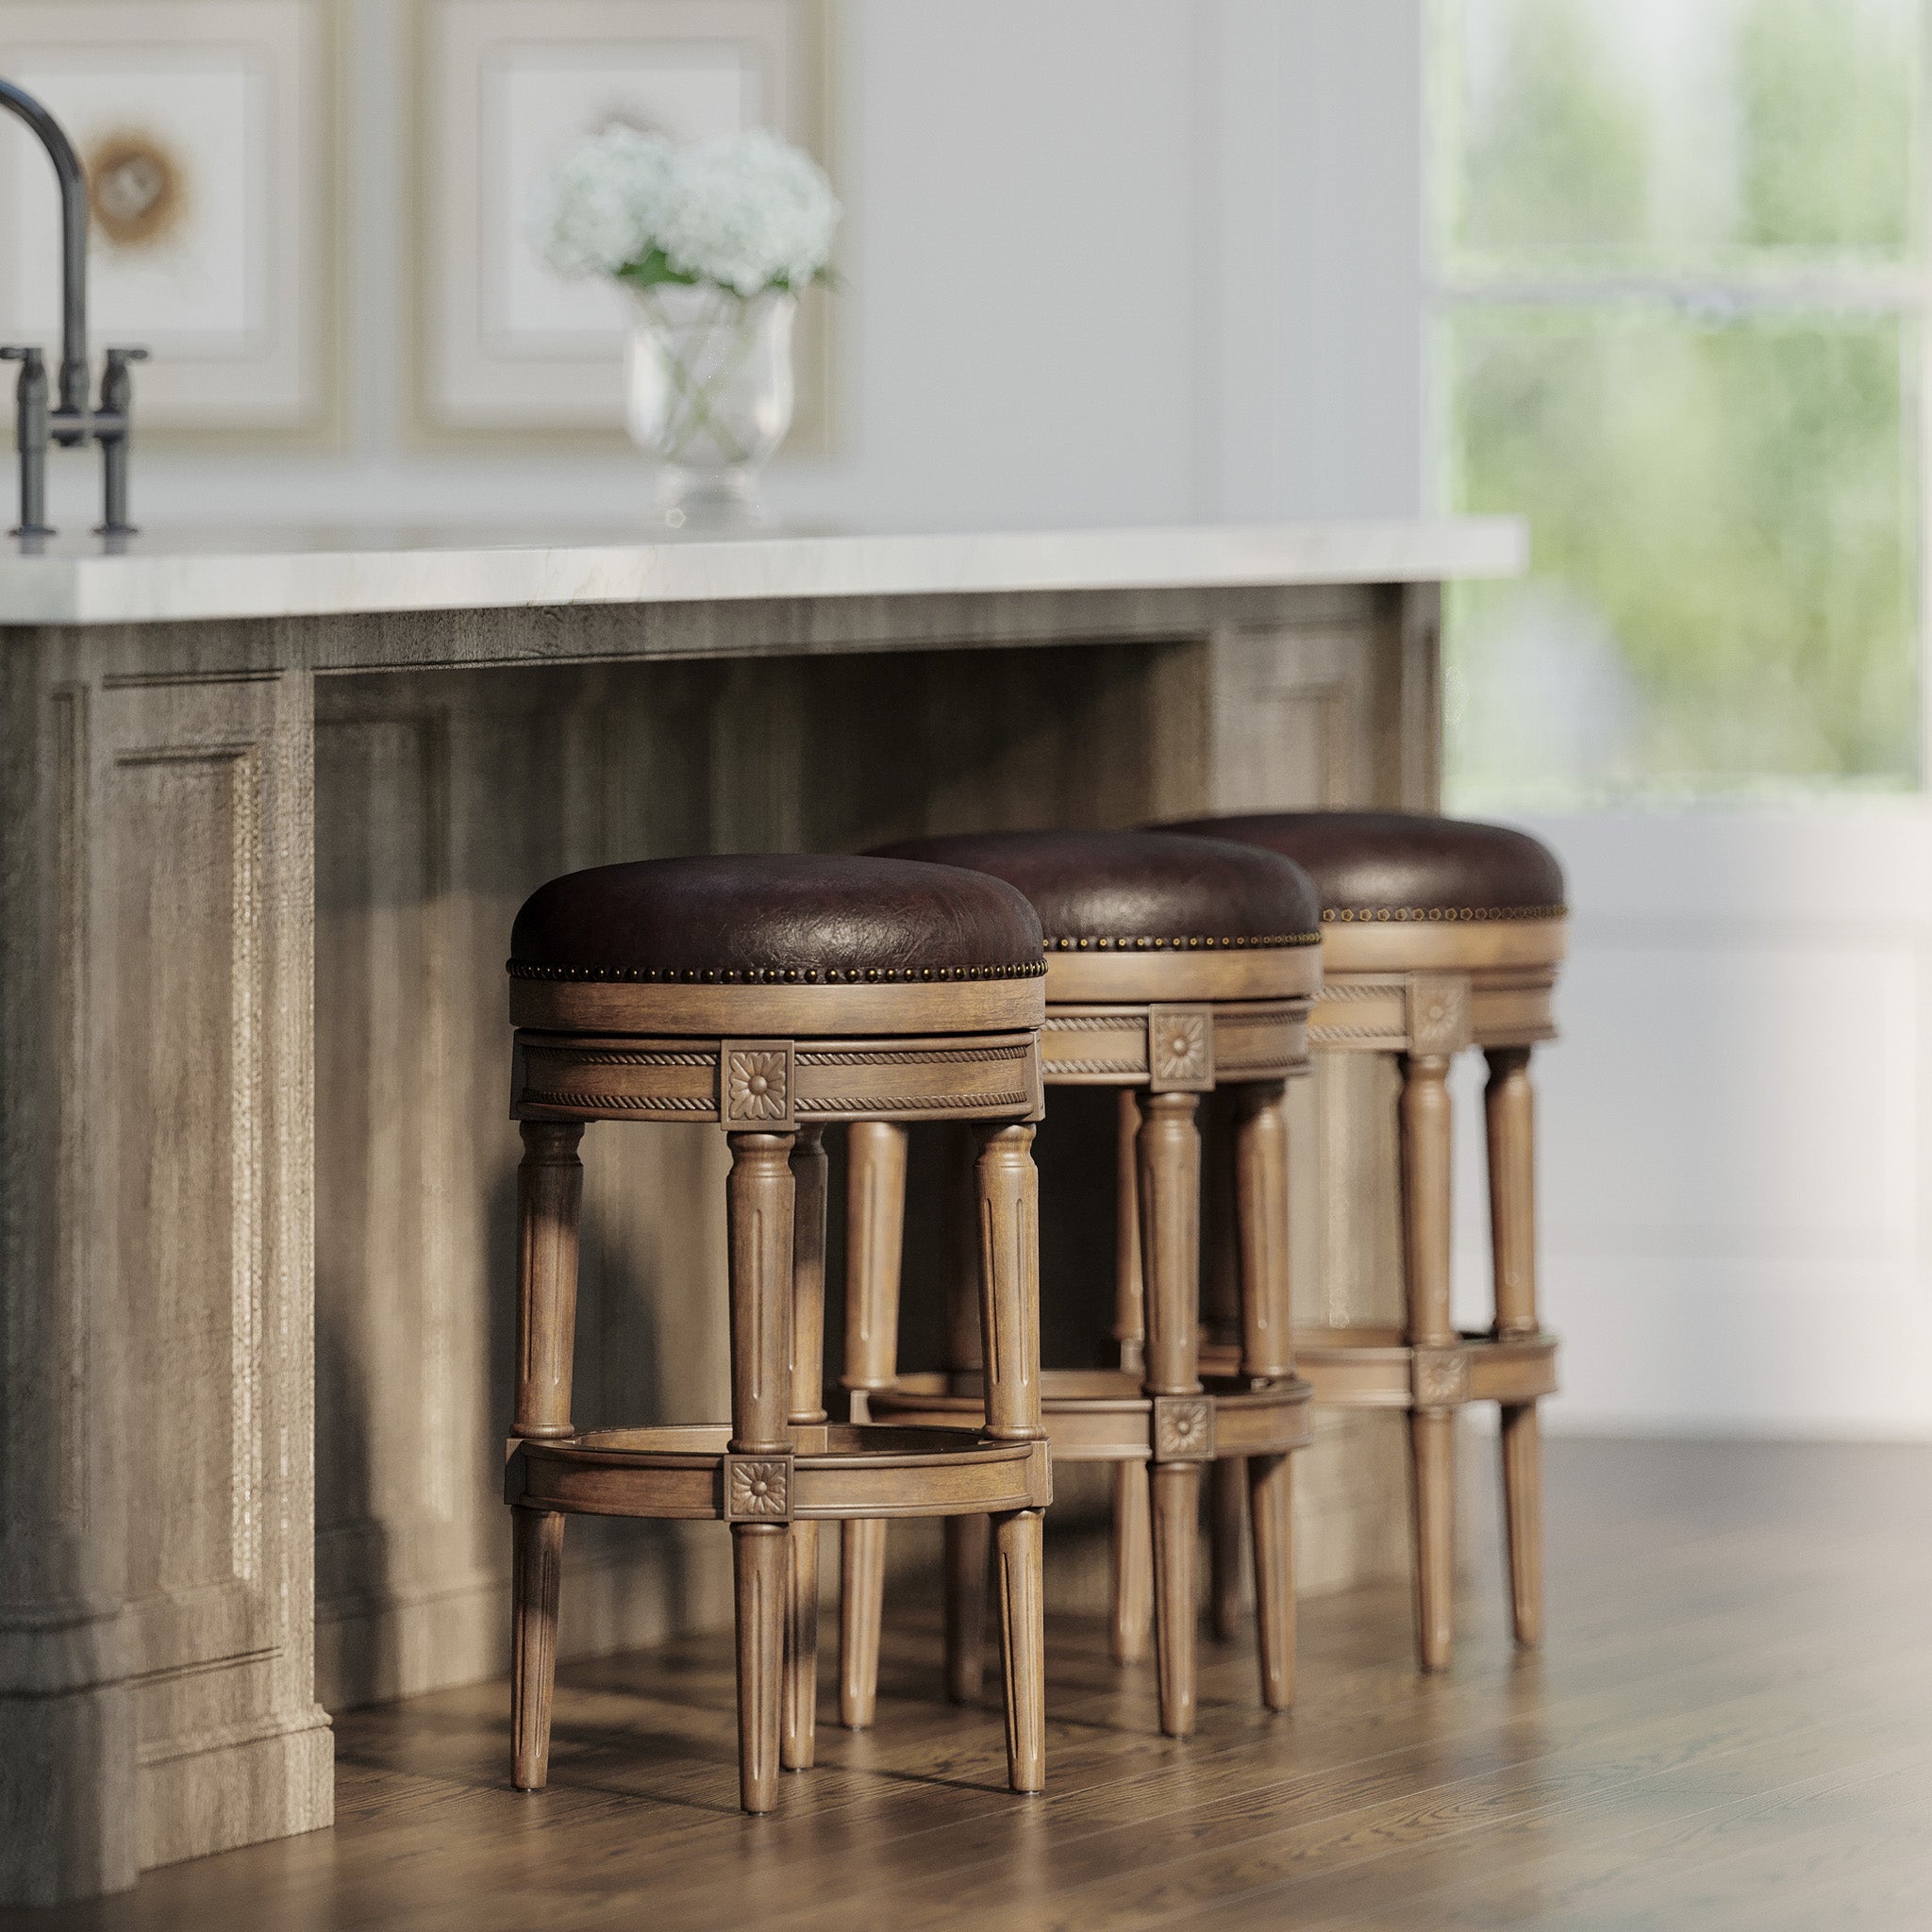 Pullman Backless Bar Stool in Walnut Finish with Marksman Saddle Vegan Leather in Stools by Maven Lane